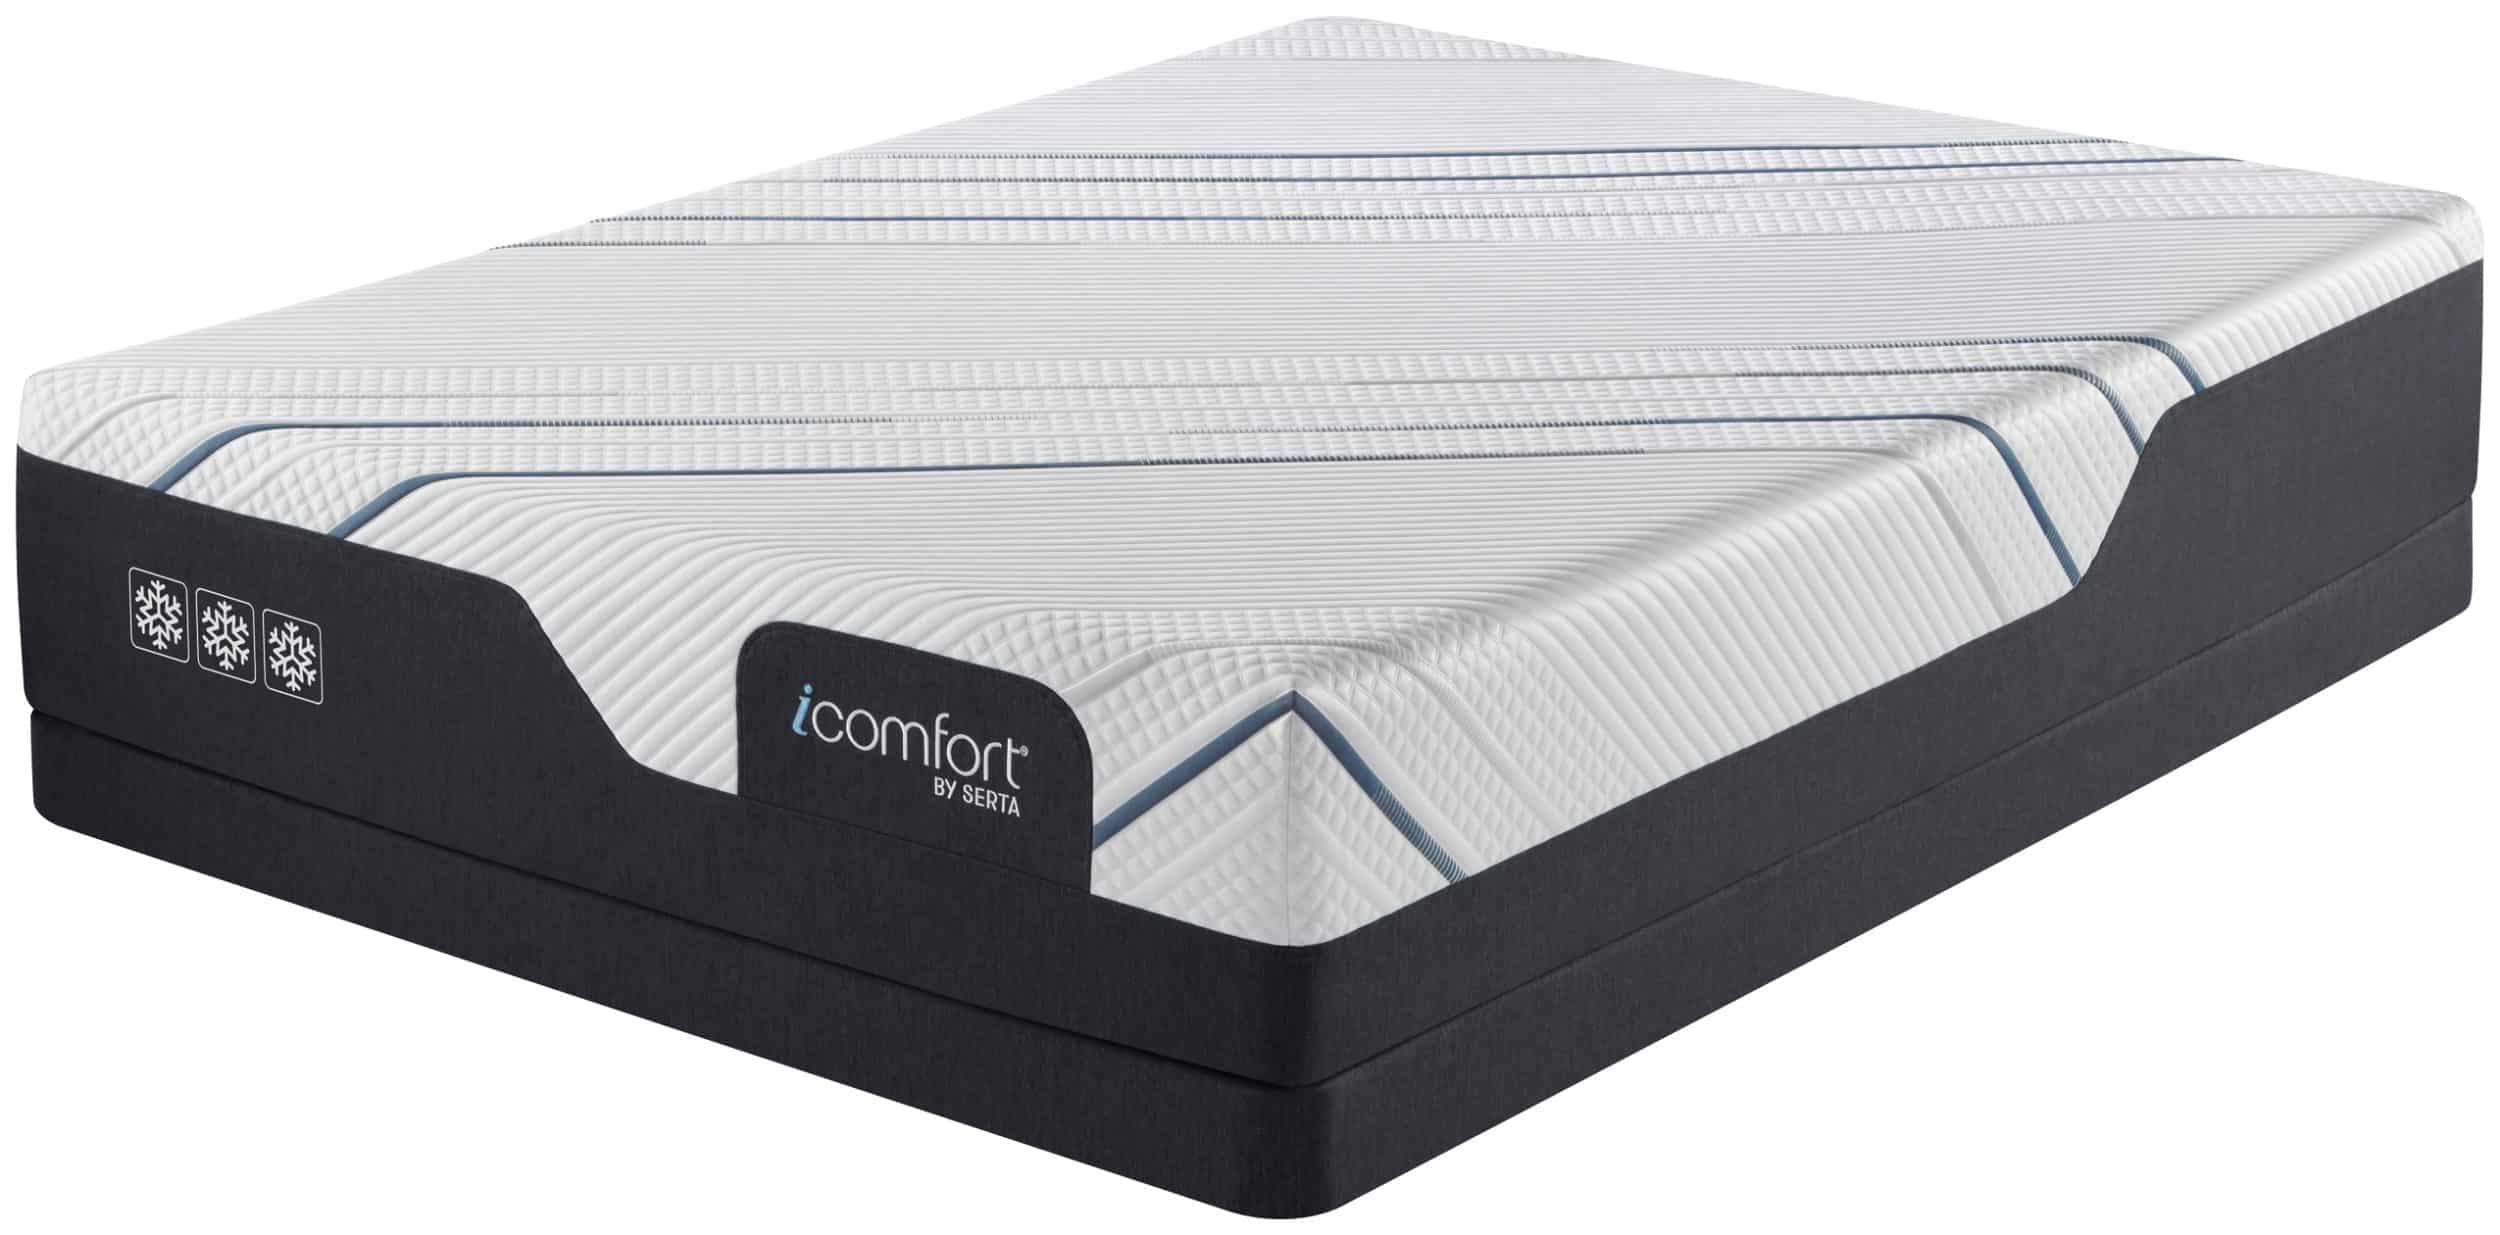 Side Corner view of the iComfort cooling mattress from serta